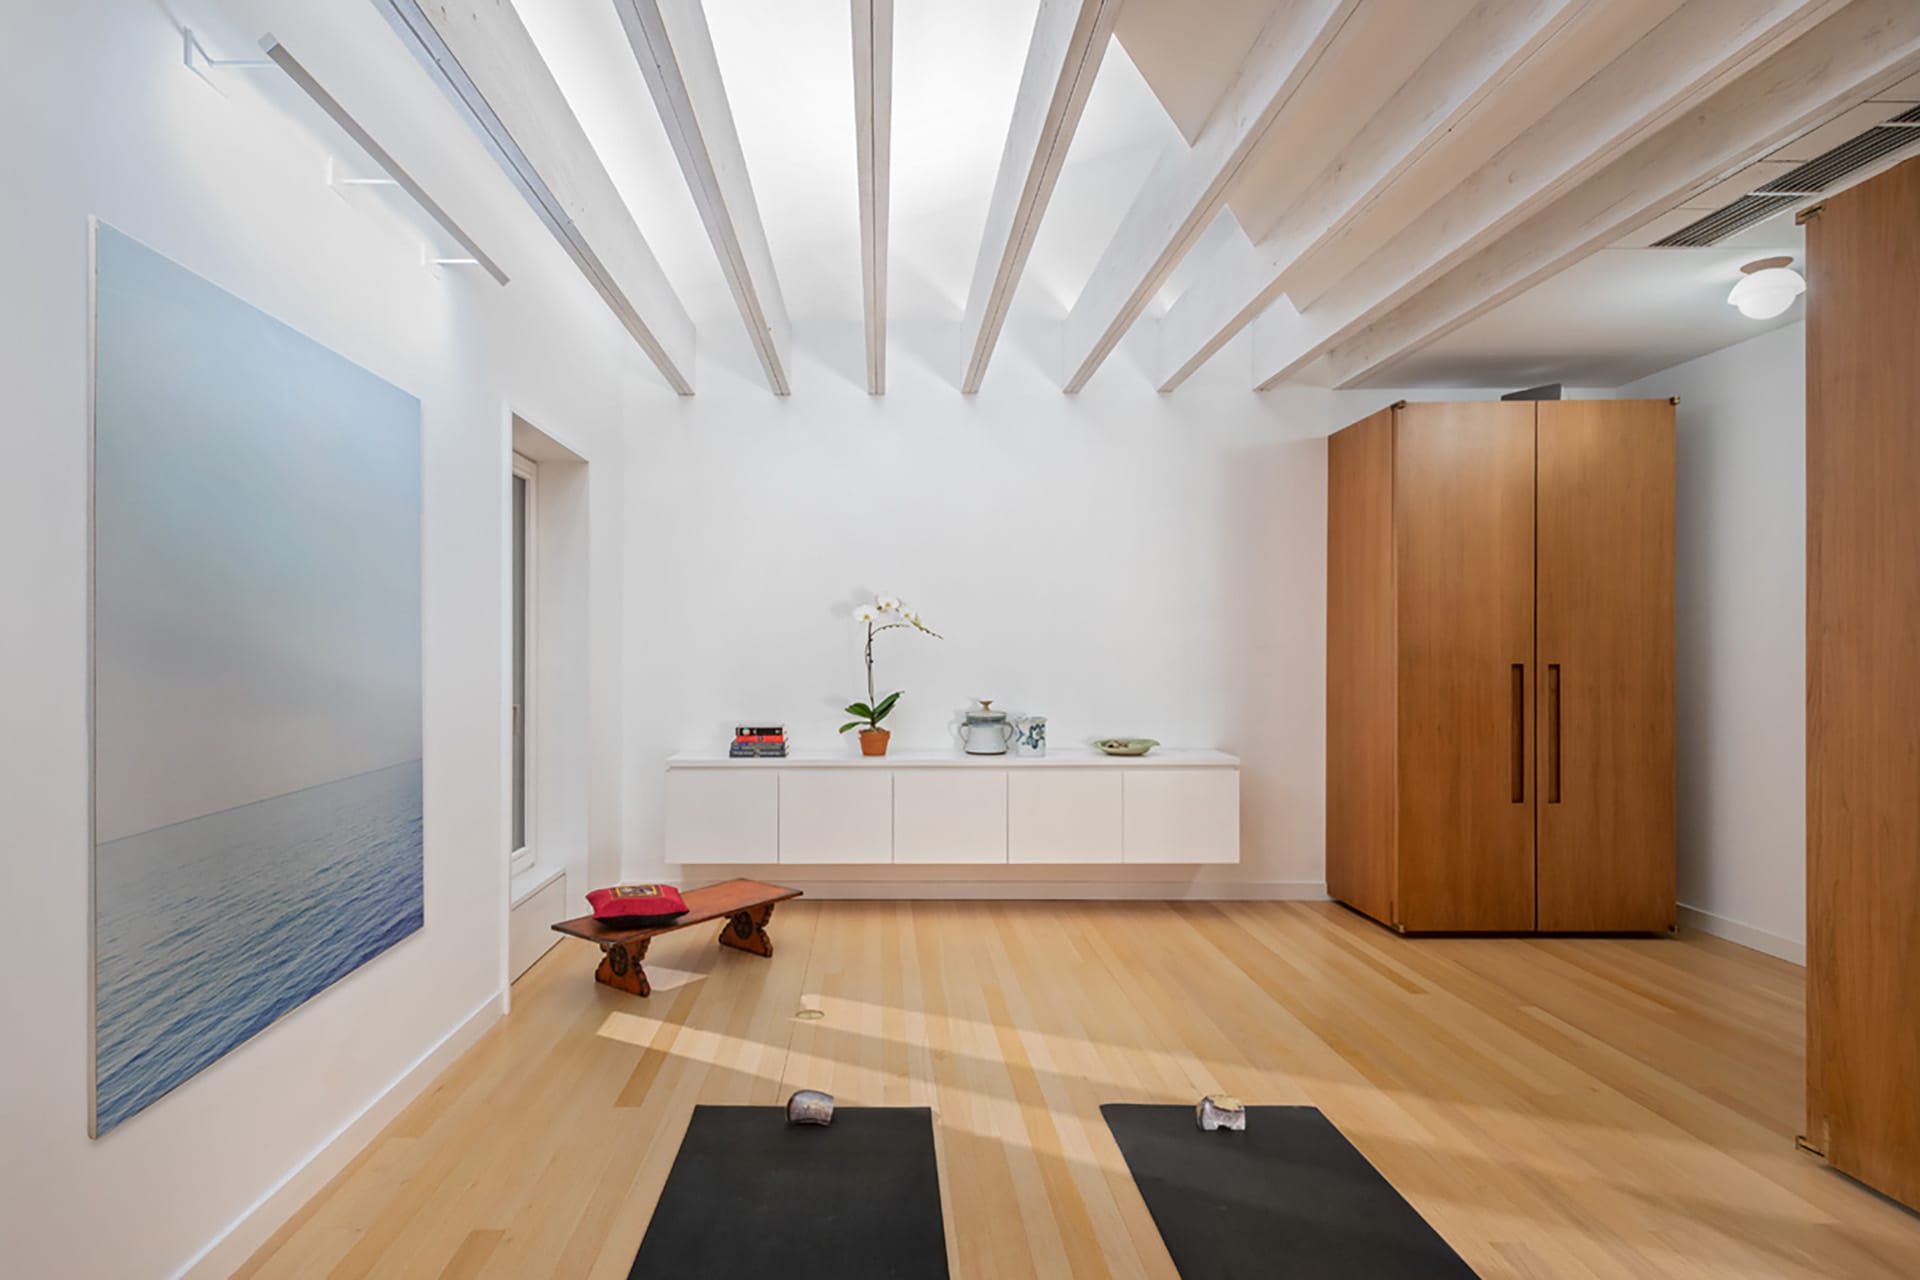 Exercise studio above a detached garage in Park Slope with natural wood.